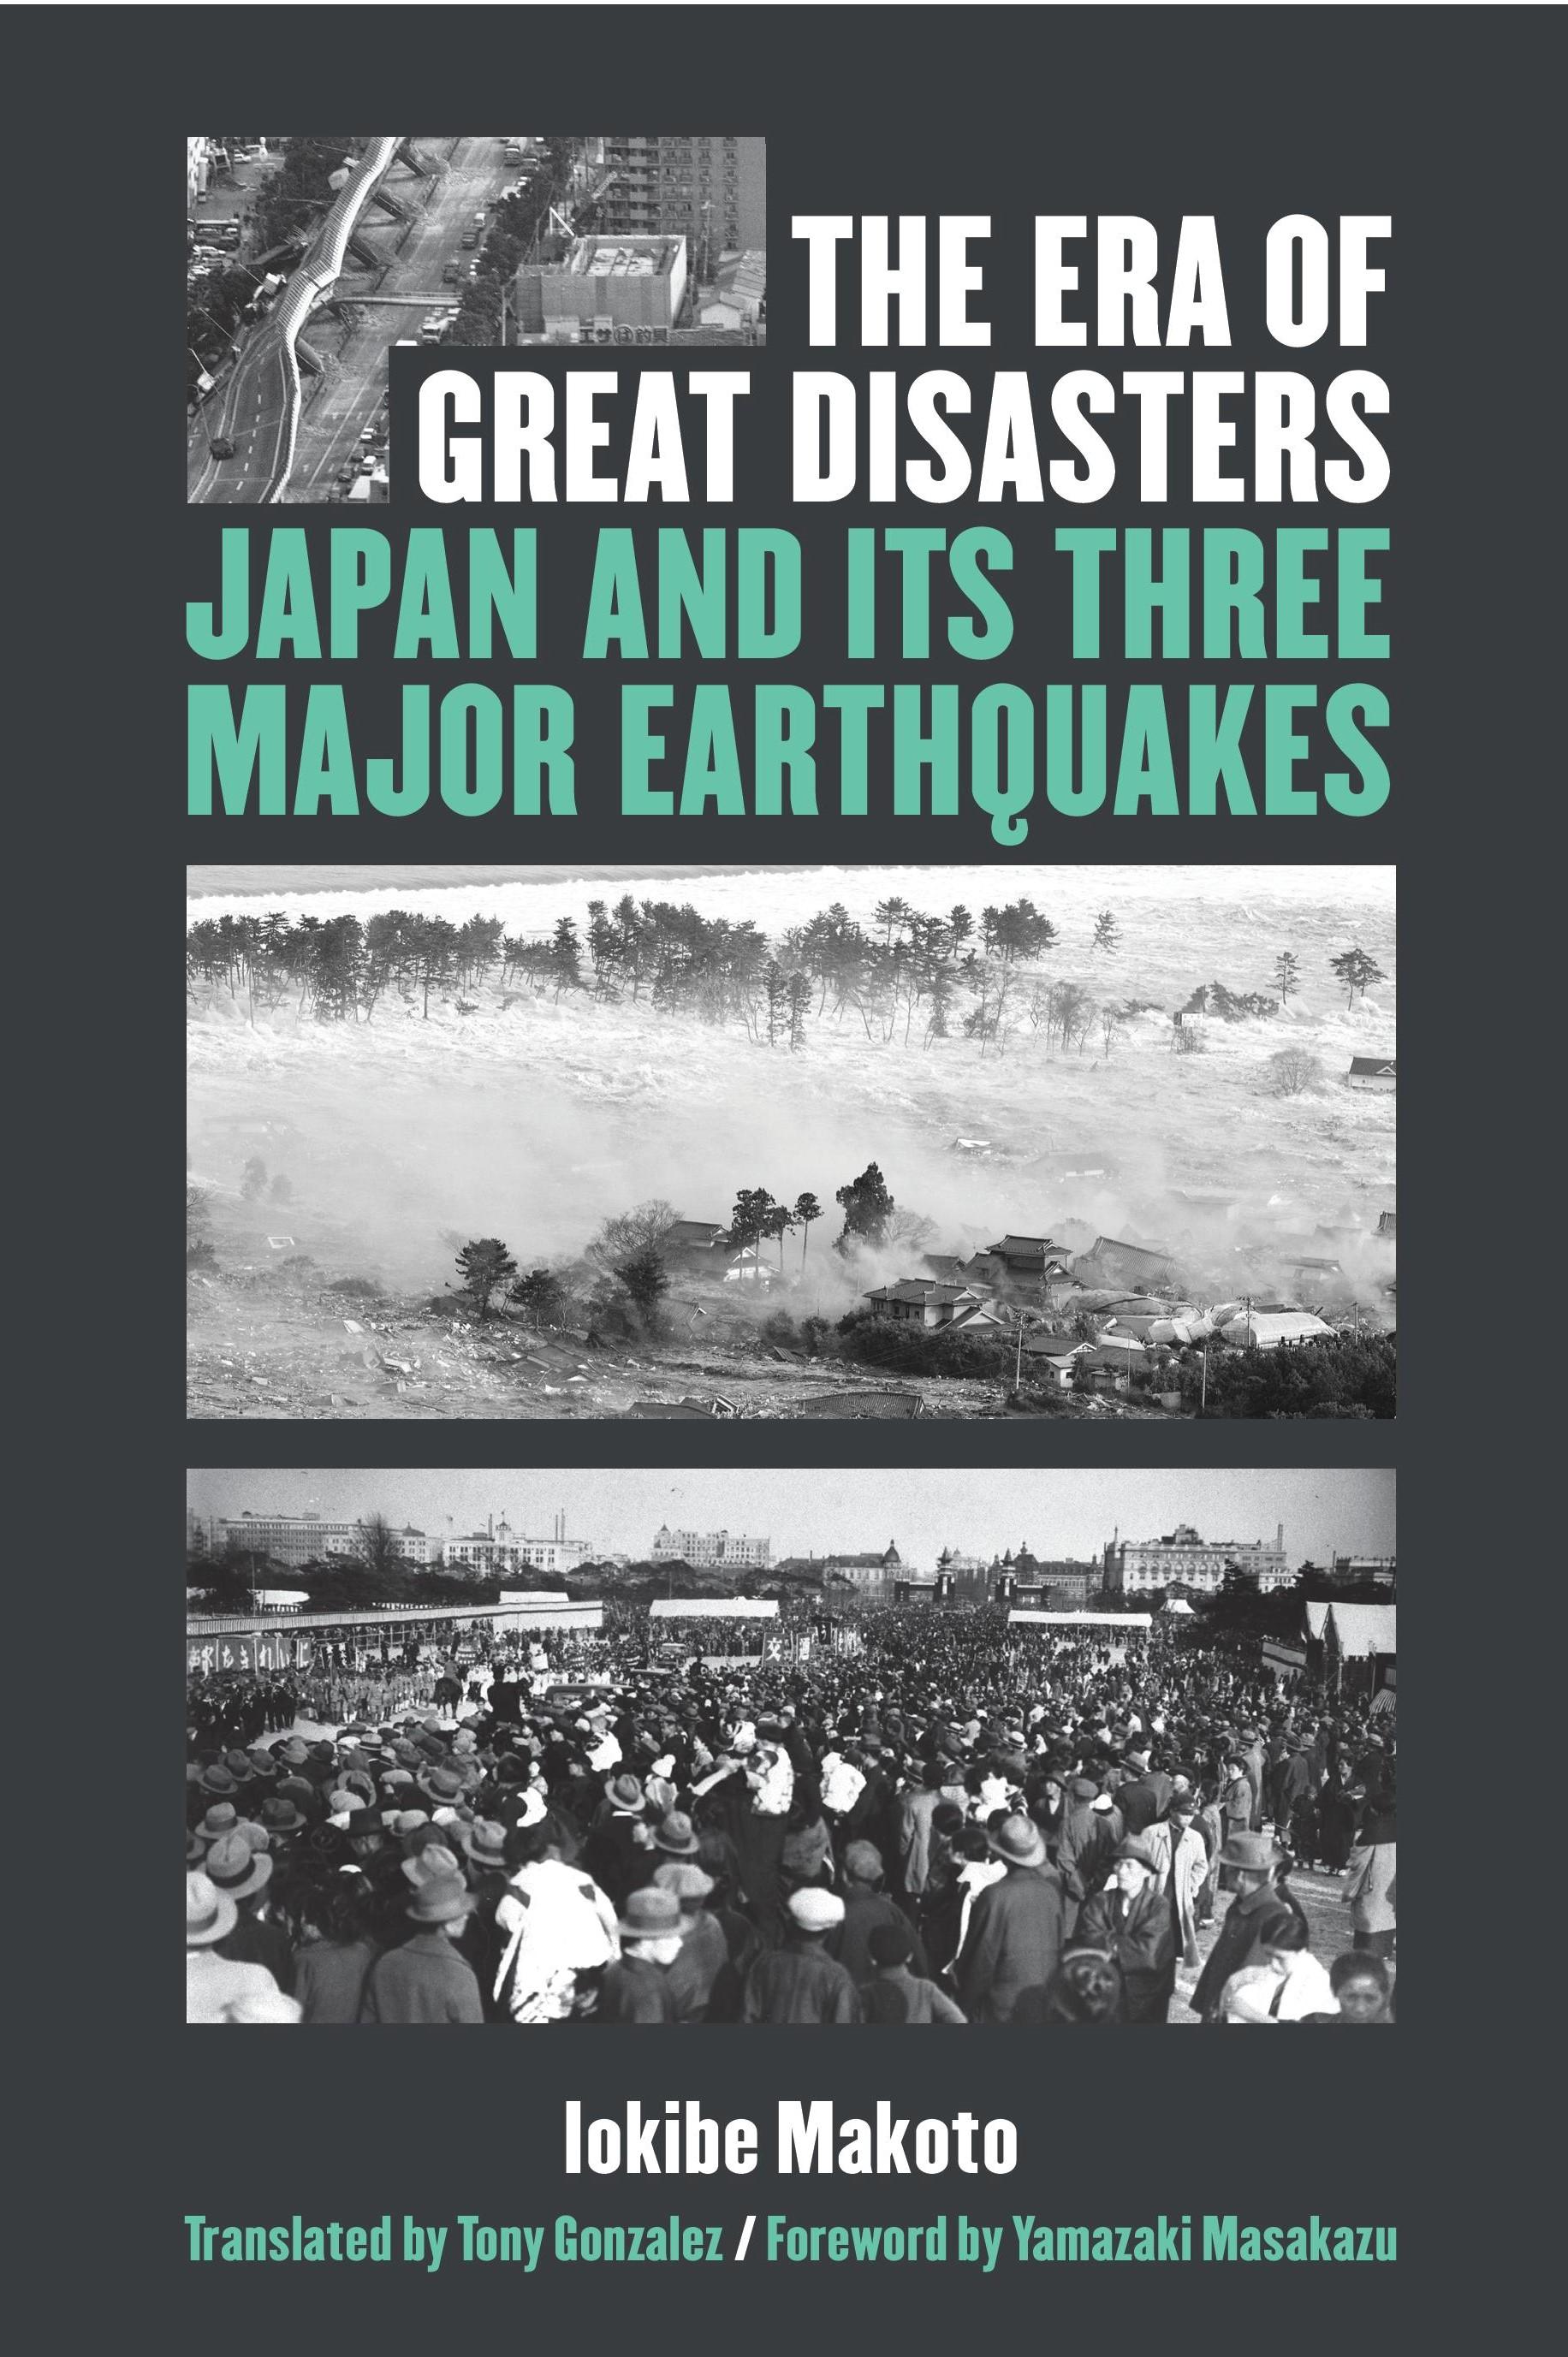 The Era of Great Disasters